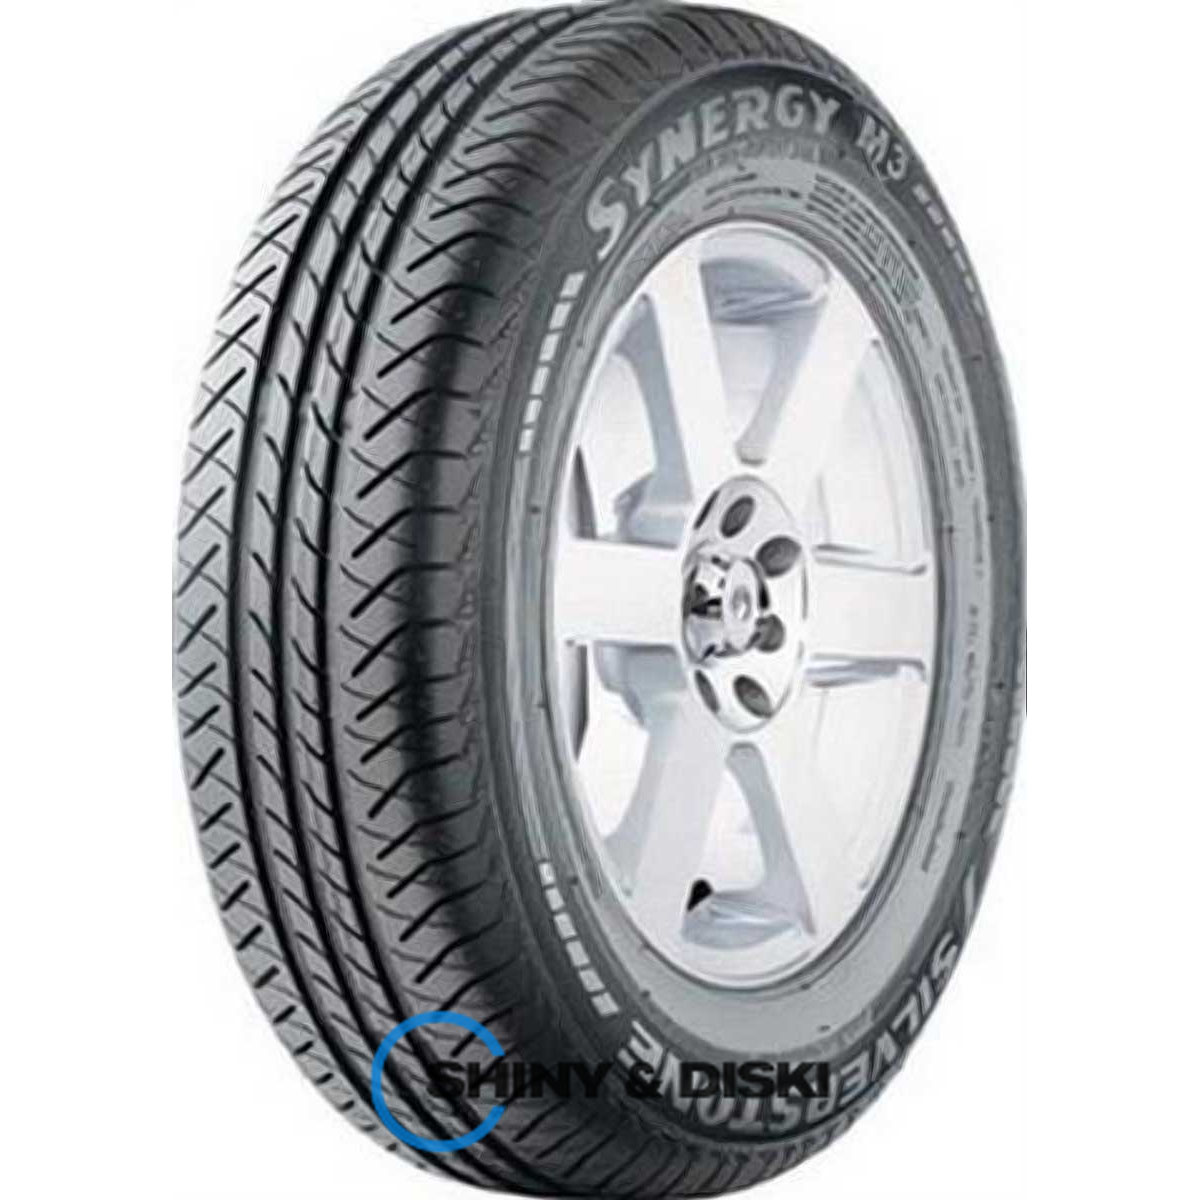 silverstone synergy m3 155/80 r12 77t